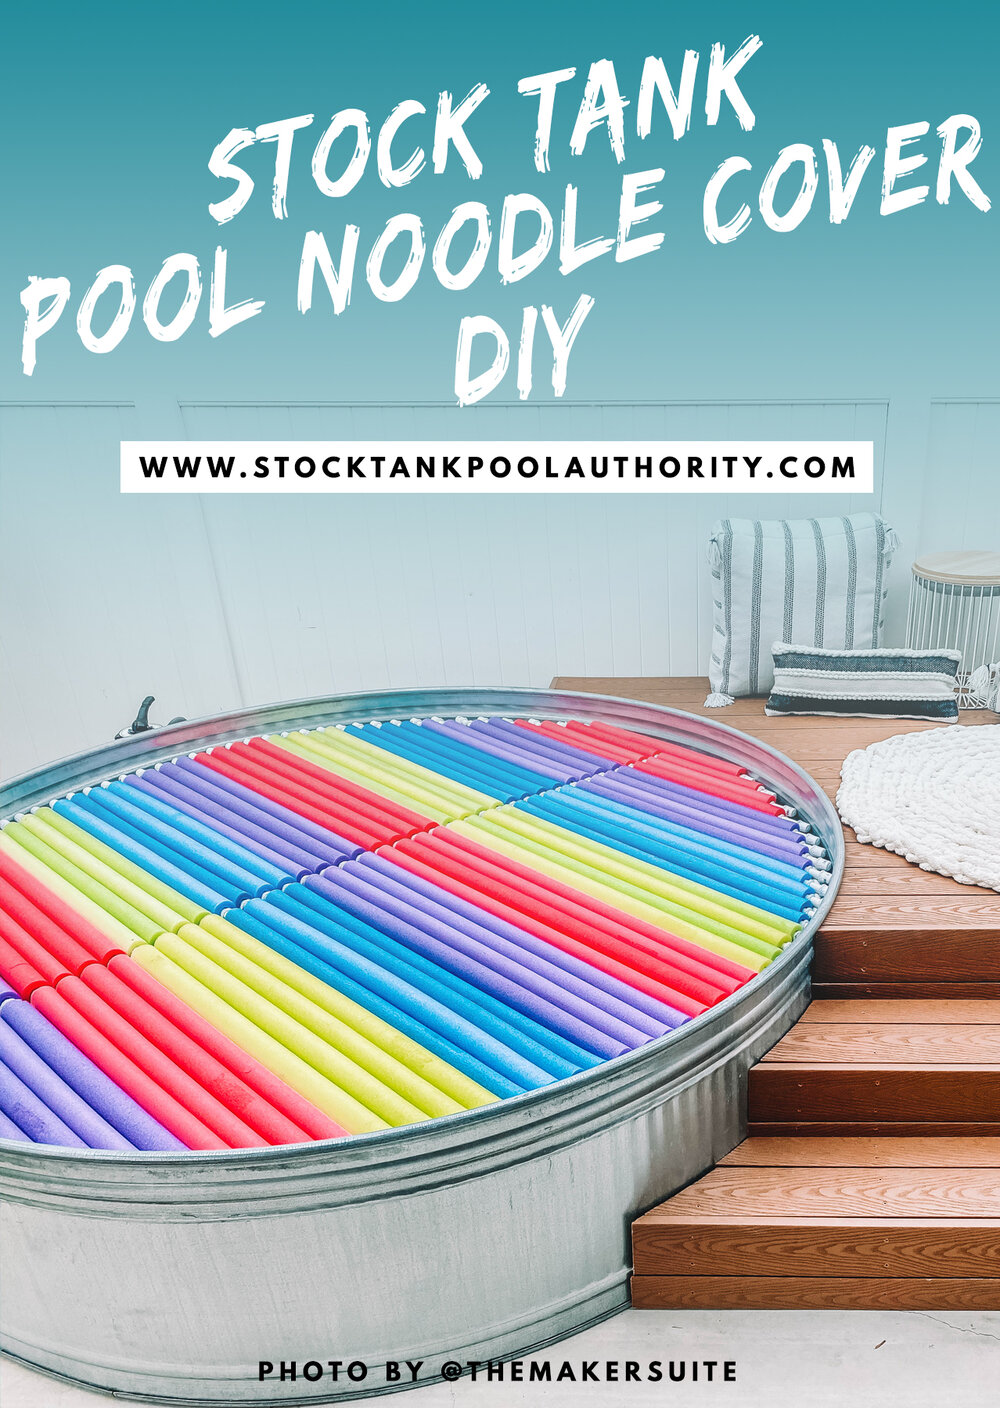 Stock Tank Pool Authority Noodle Cover DIY 3.jpg